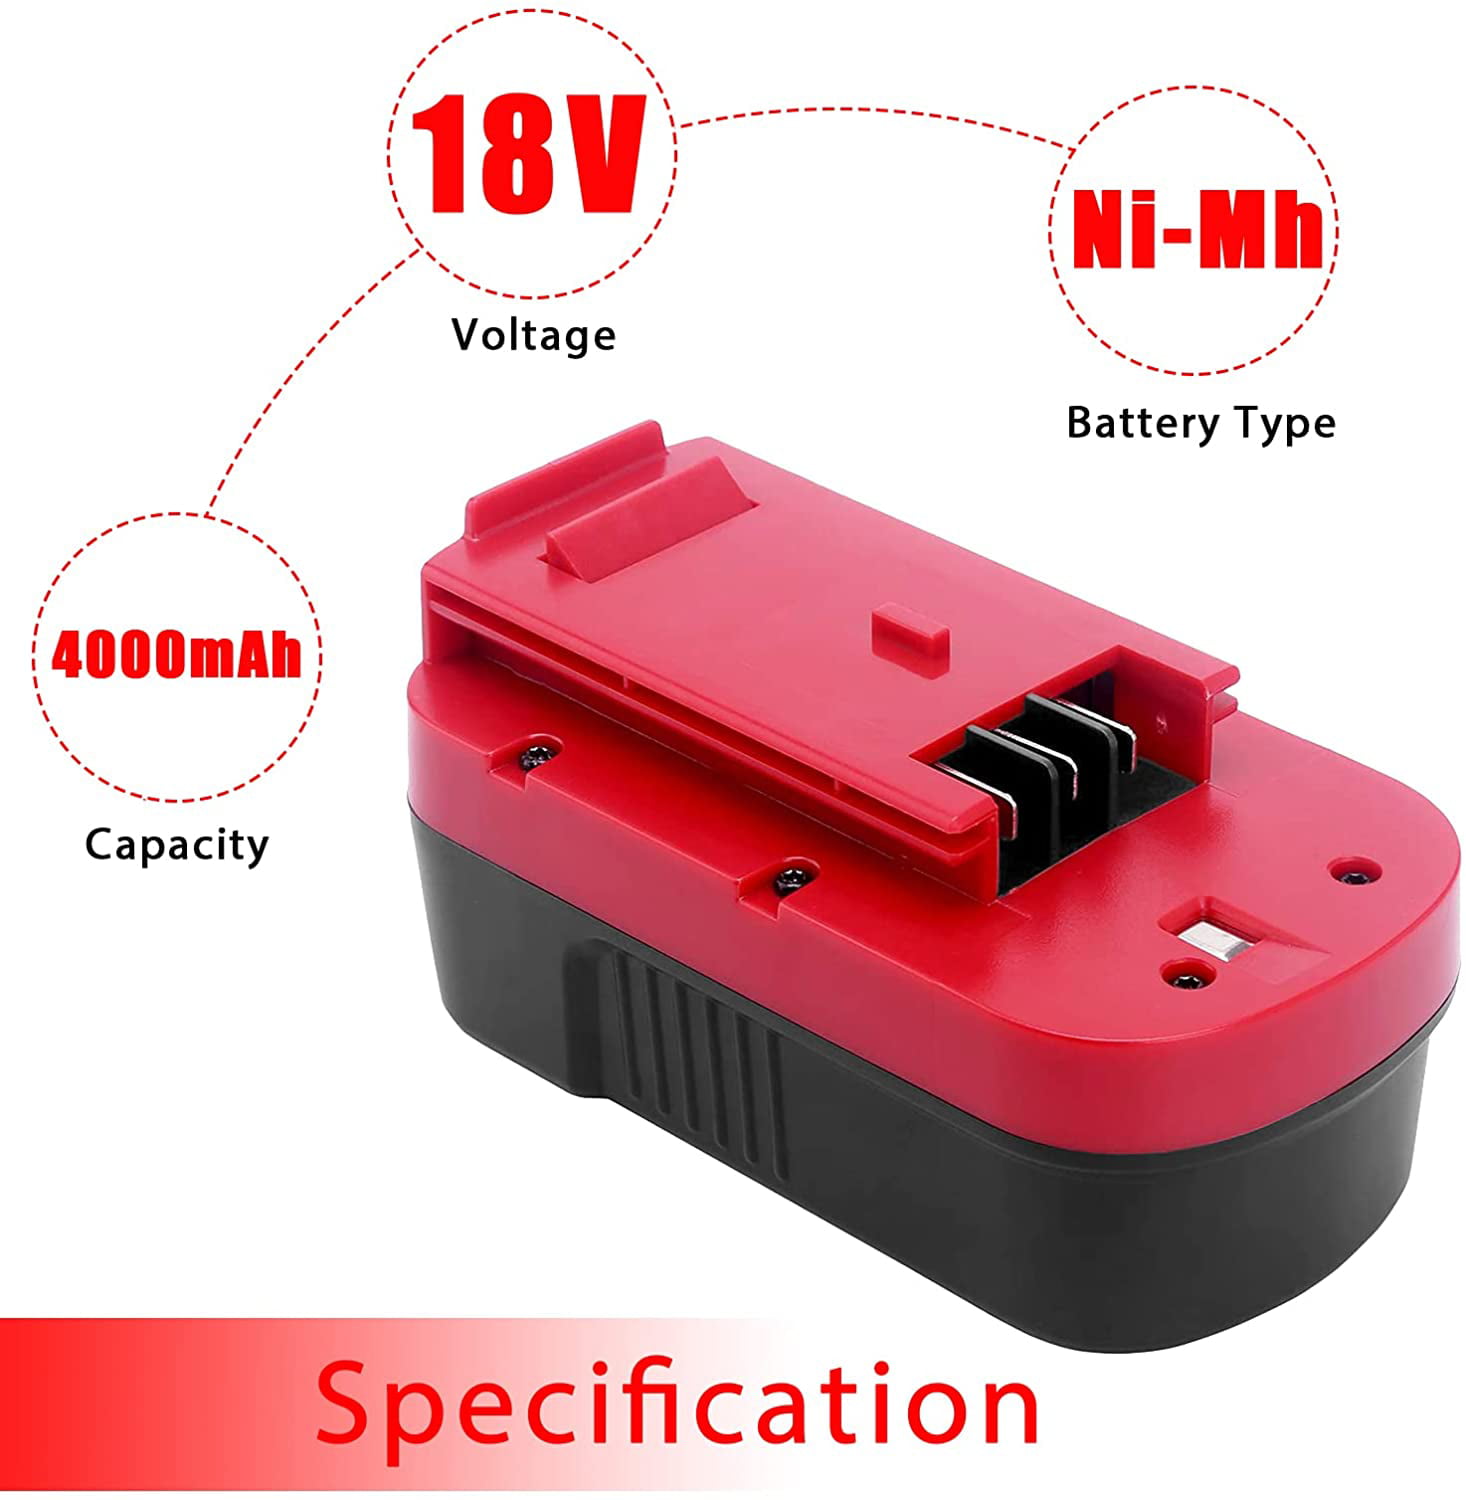 HPB18 Battery/Charger for Black and Decker 18 Volt Cordless Power Tools  HPB18-OP